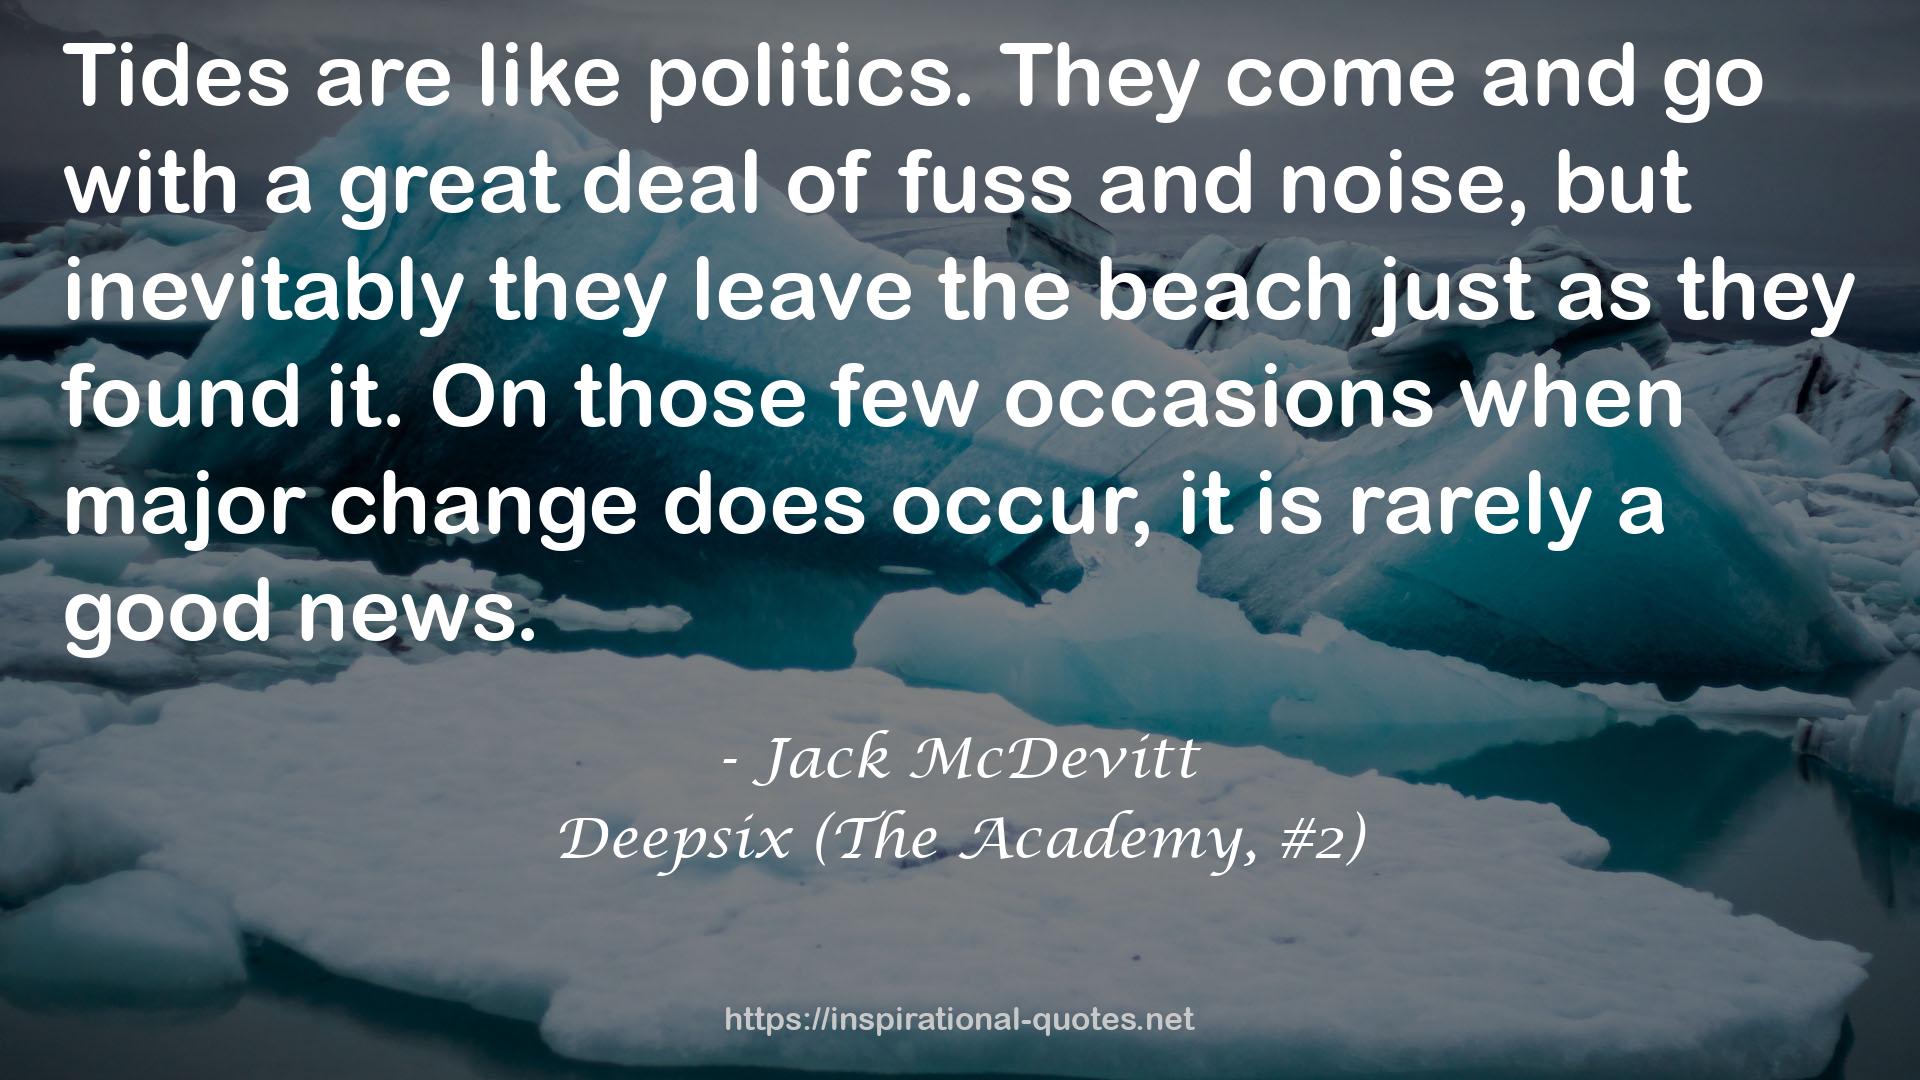 Deepsix (The Academy, #2) QUOTES